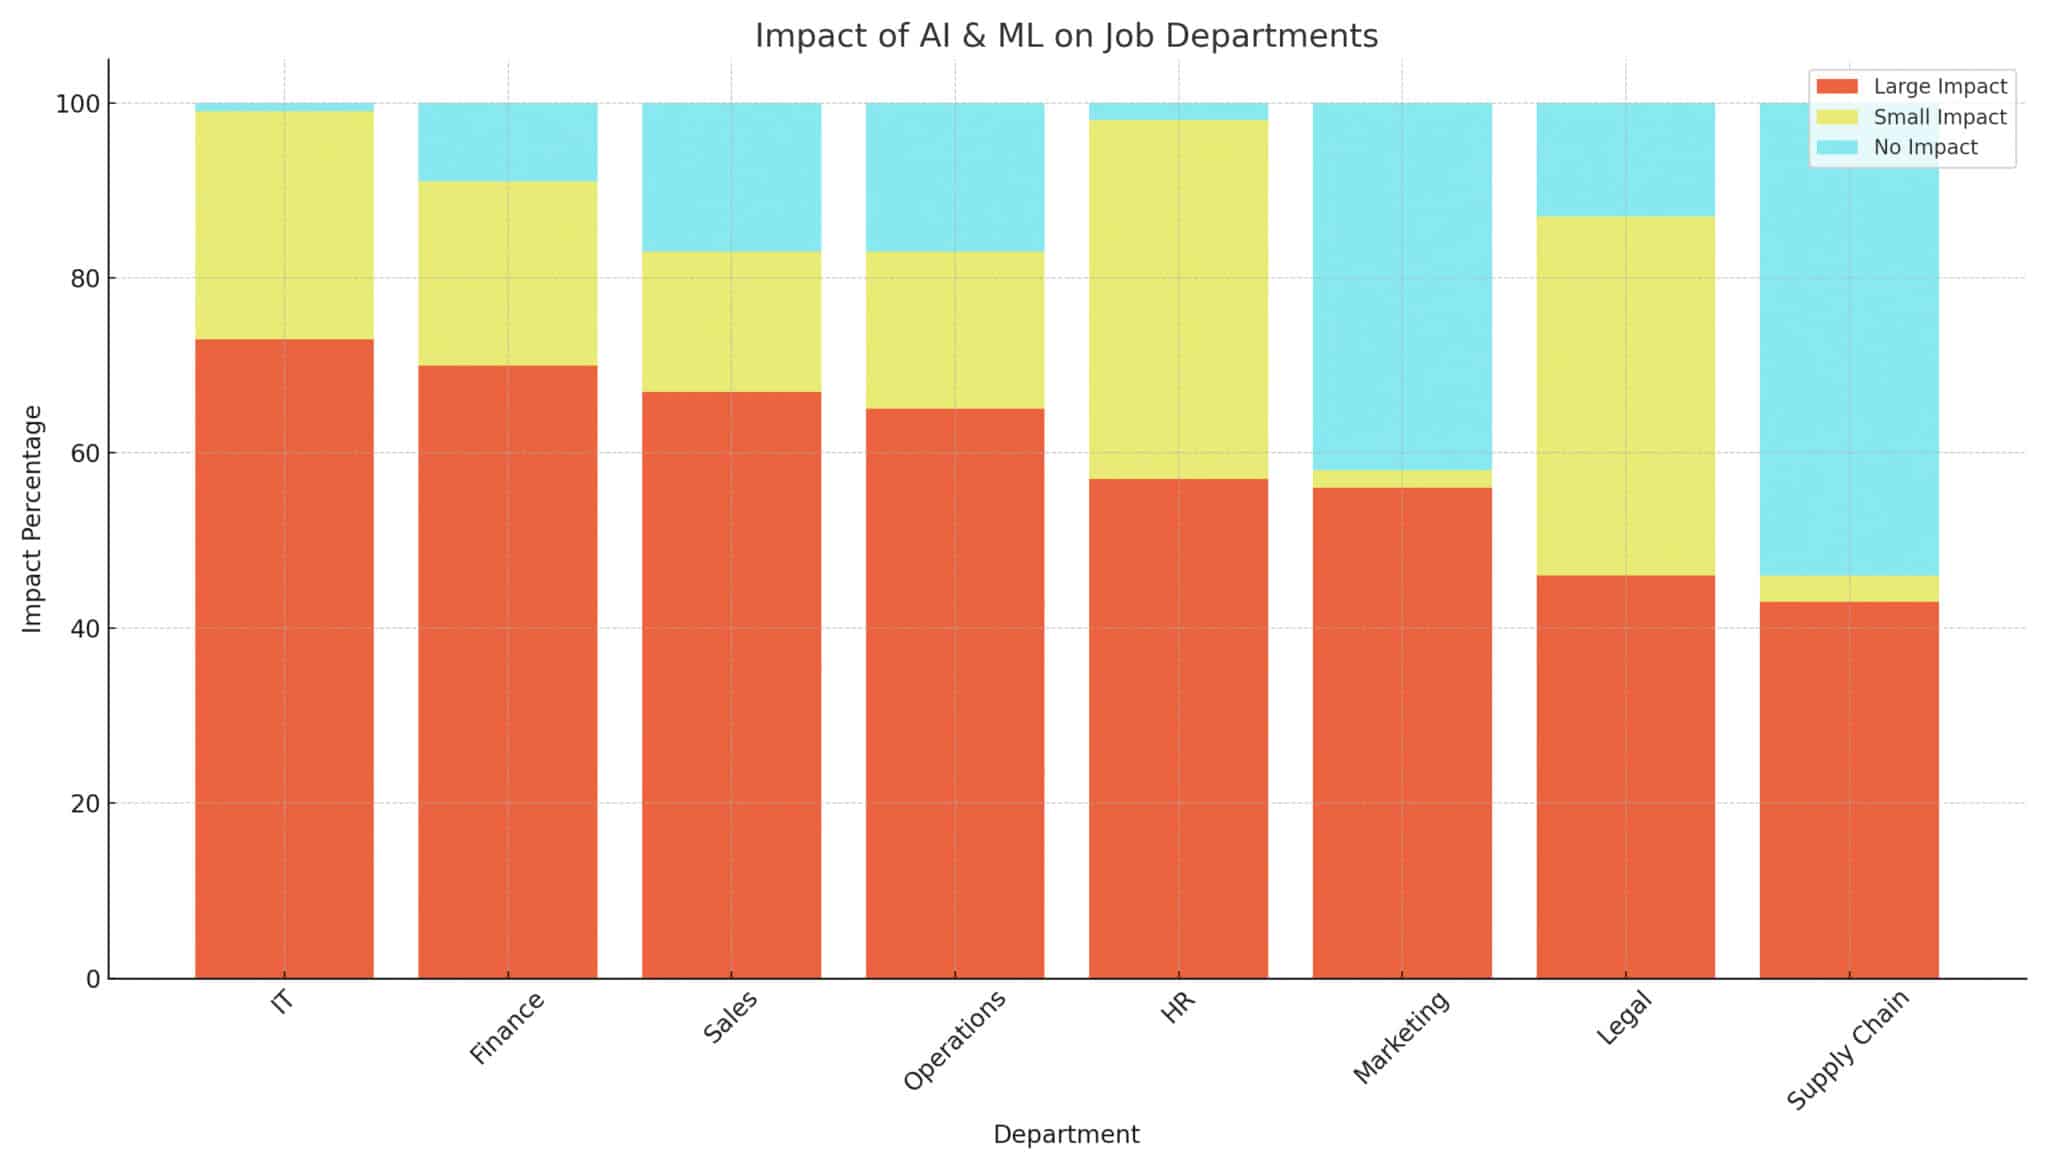 Stacked bar chart showing the impact of AI and ML technologies across different job departments, with percentages indicating large, small, or no impact. Colors represent impact levels: Burnt Sienna for large impact, Straw for small impact, and Electric Blue for no impact, highlighting the significant influence in IT, Finance, Sales, and Operations, with lesser but notable effects in HR, Marketing, Legal, and Supply Chain.